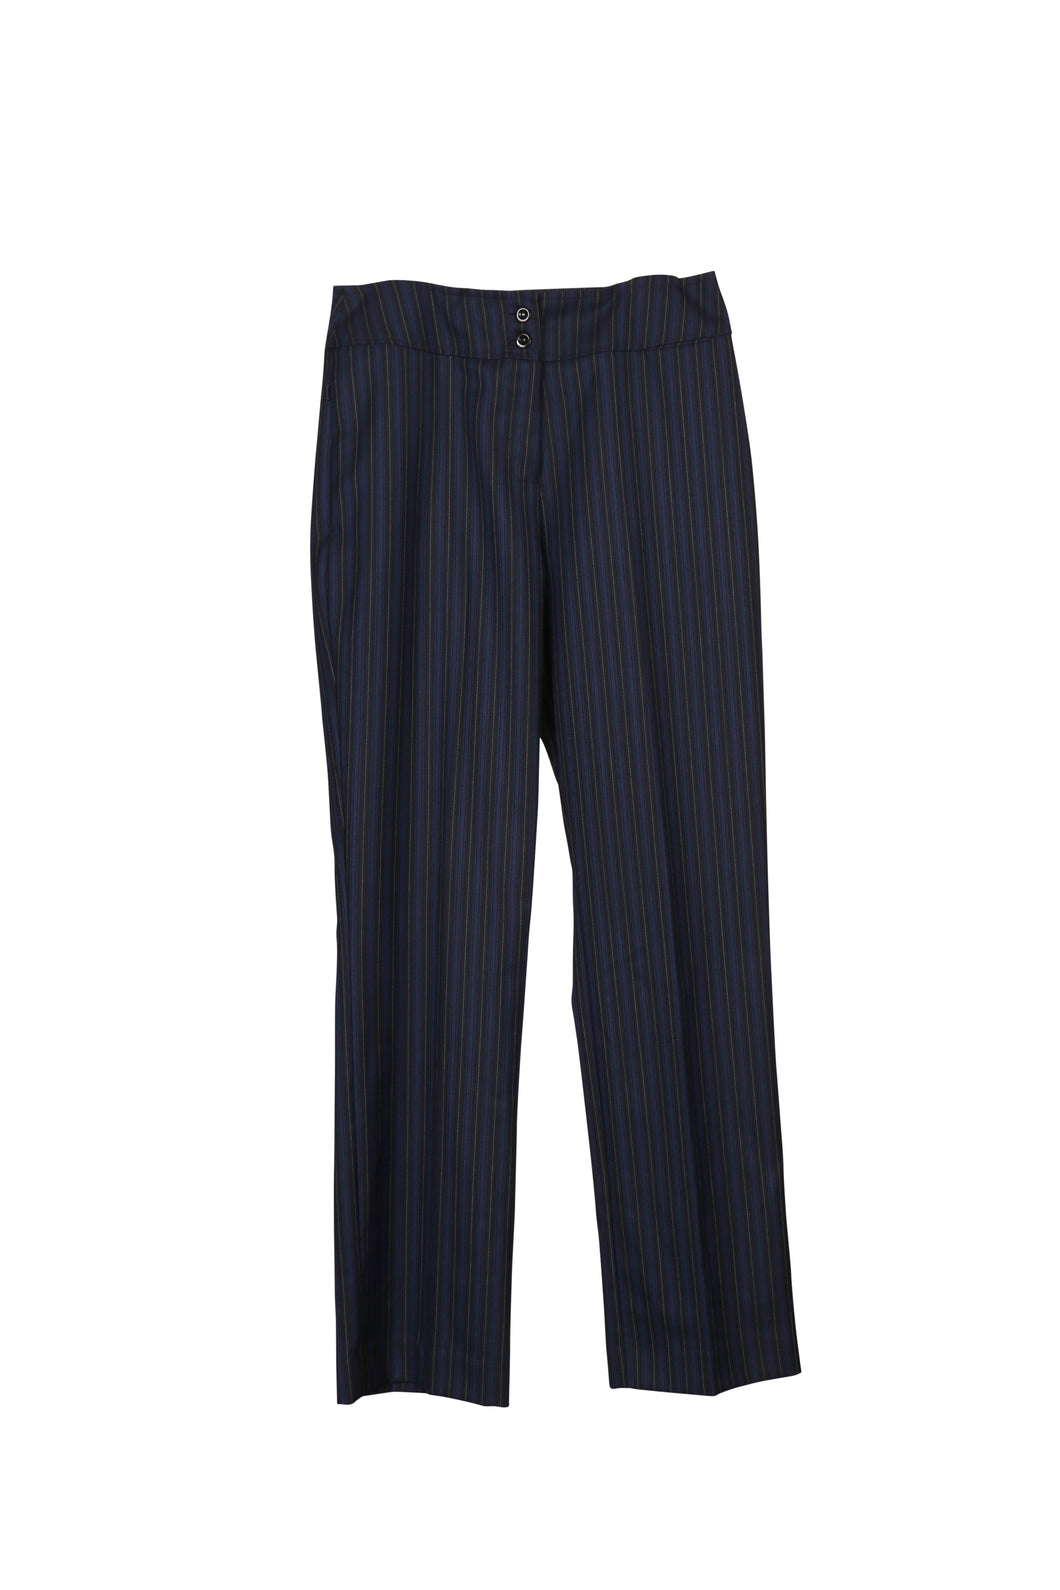 Winter/Formal Striped, Poly/Wool, Trousers (Optional Item) (SKC)